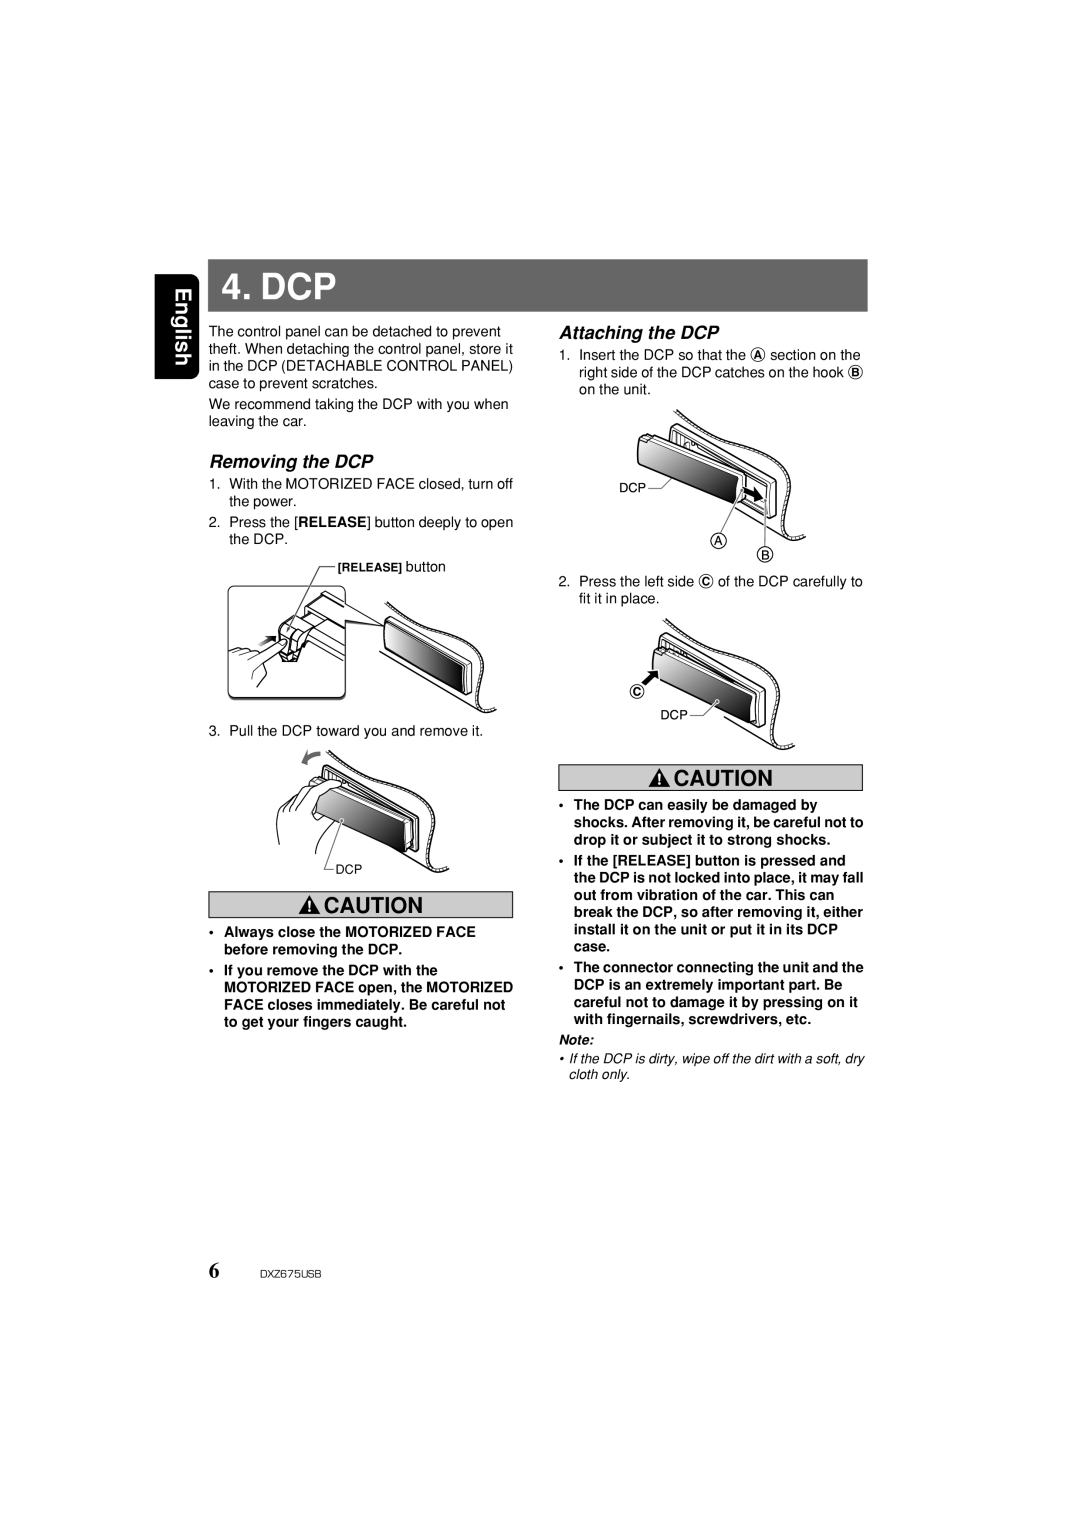 Clarion DXZ675USB owner manual Dcp, Removing the DCP, Attaching the DCP, English 